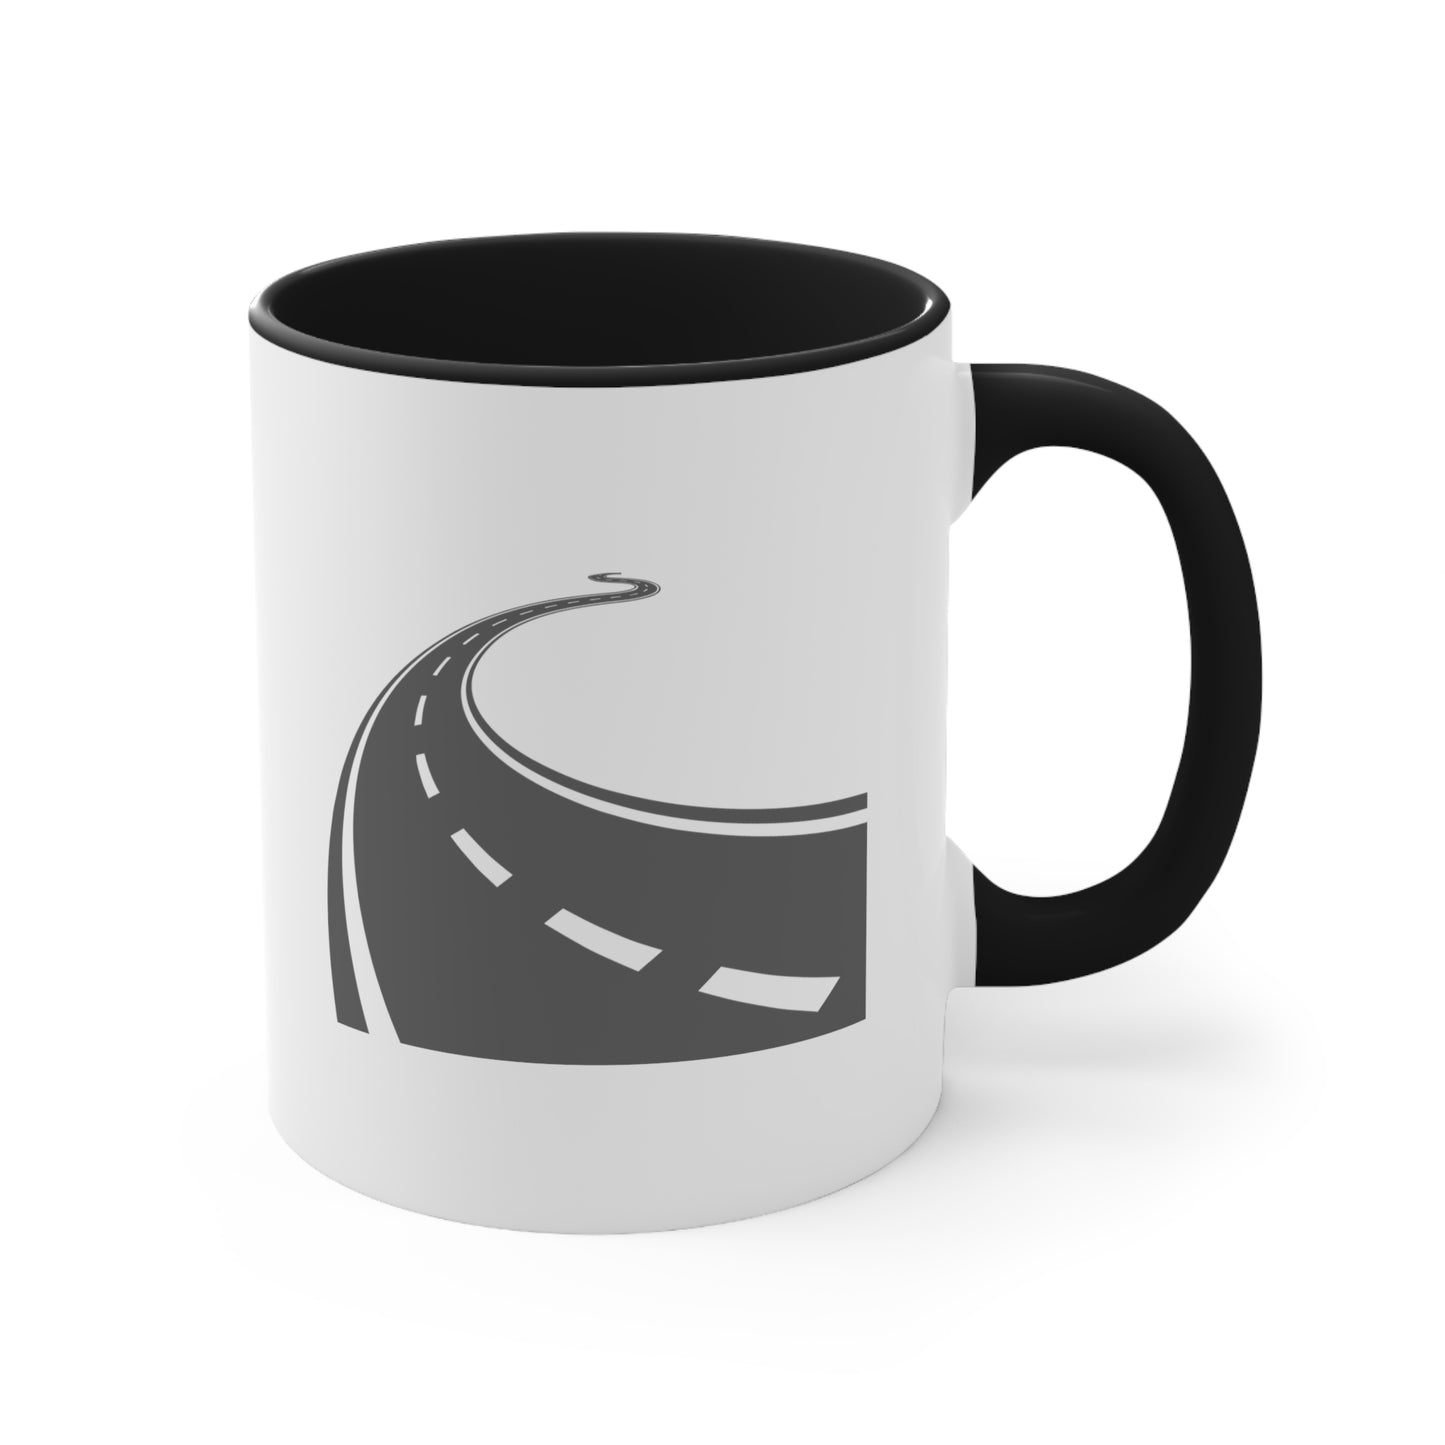 Long and Winding Road Coffee Mug - Double Sided Black Accent White Ceramic 11oz by TheGlassyLass.com